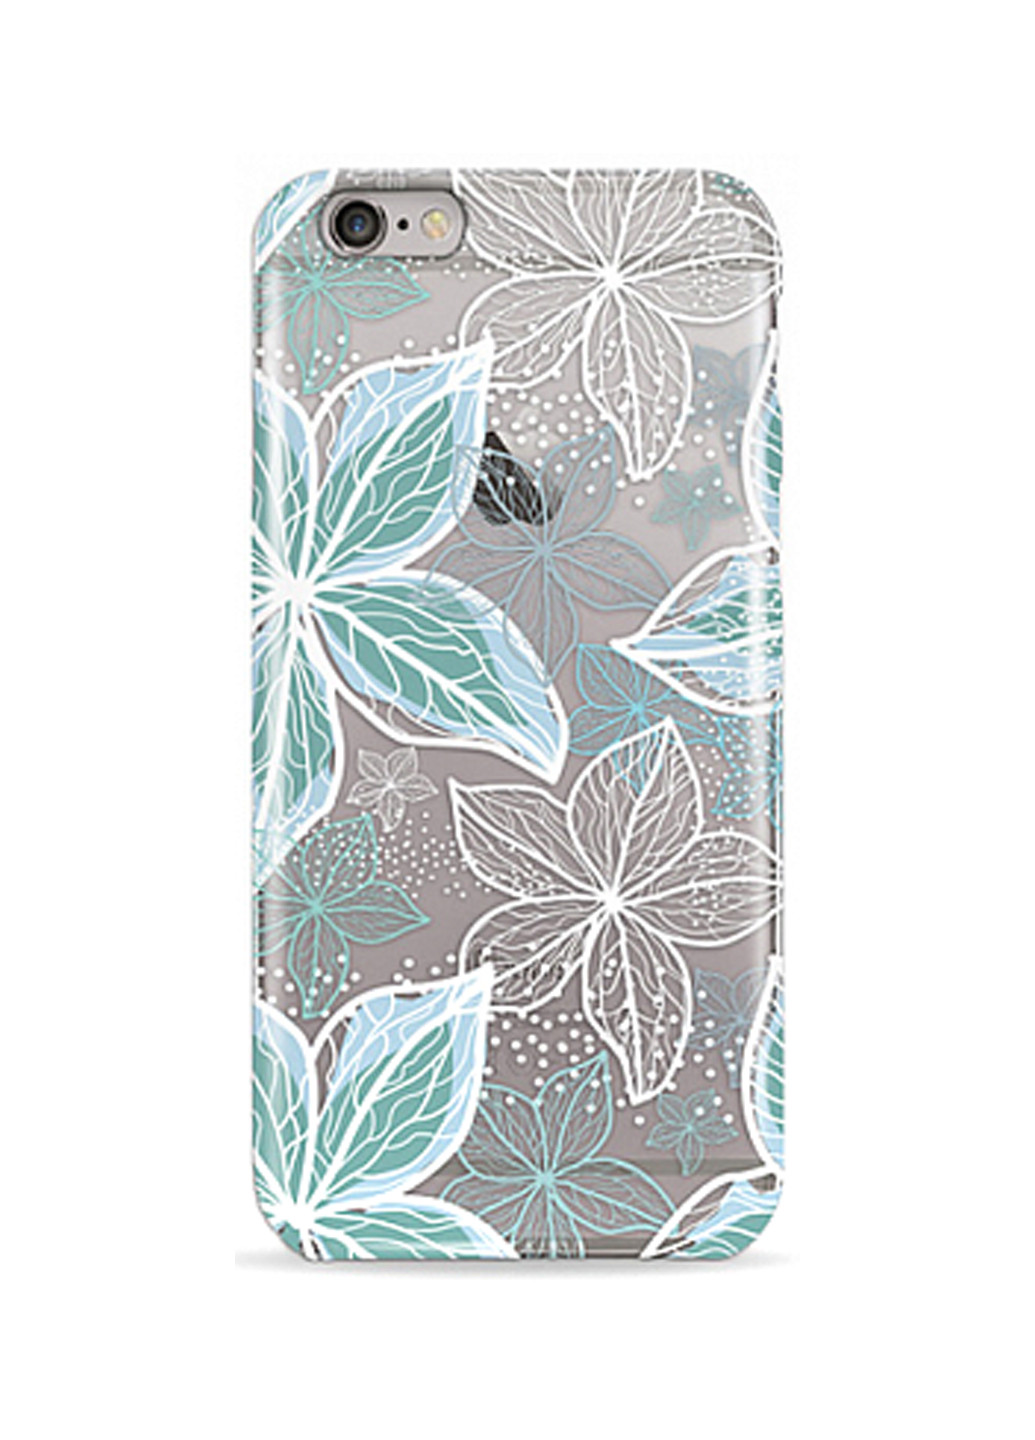 Чехол Transperency Case for iPhone 6/6S Blue Flowers Pump transperency case для iphone 6/6s blue flowers (136993731)